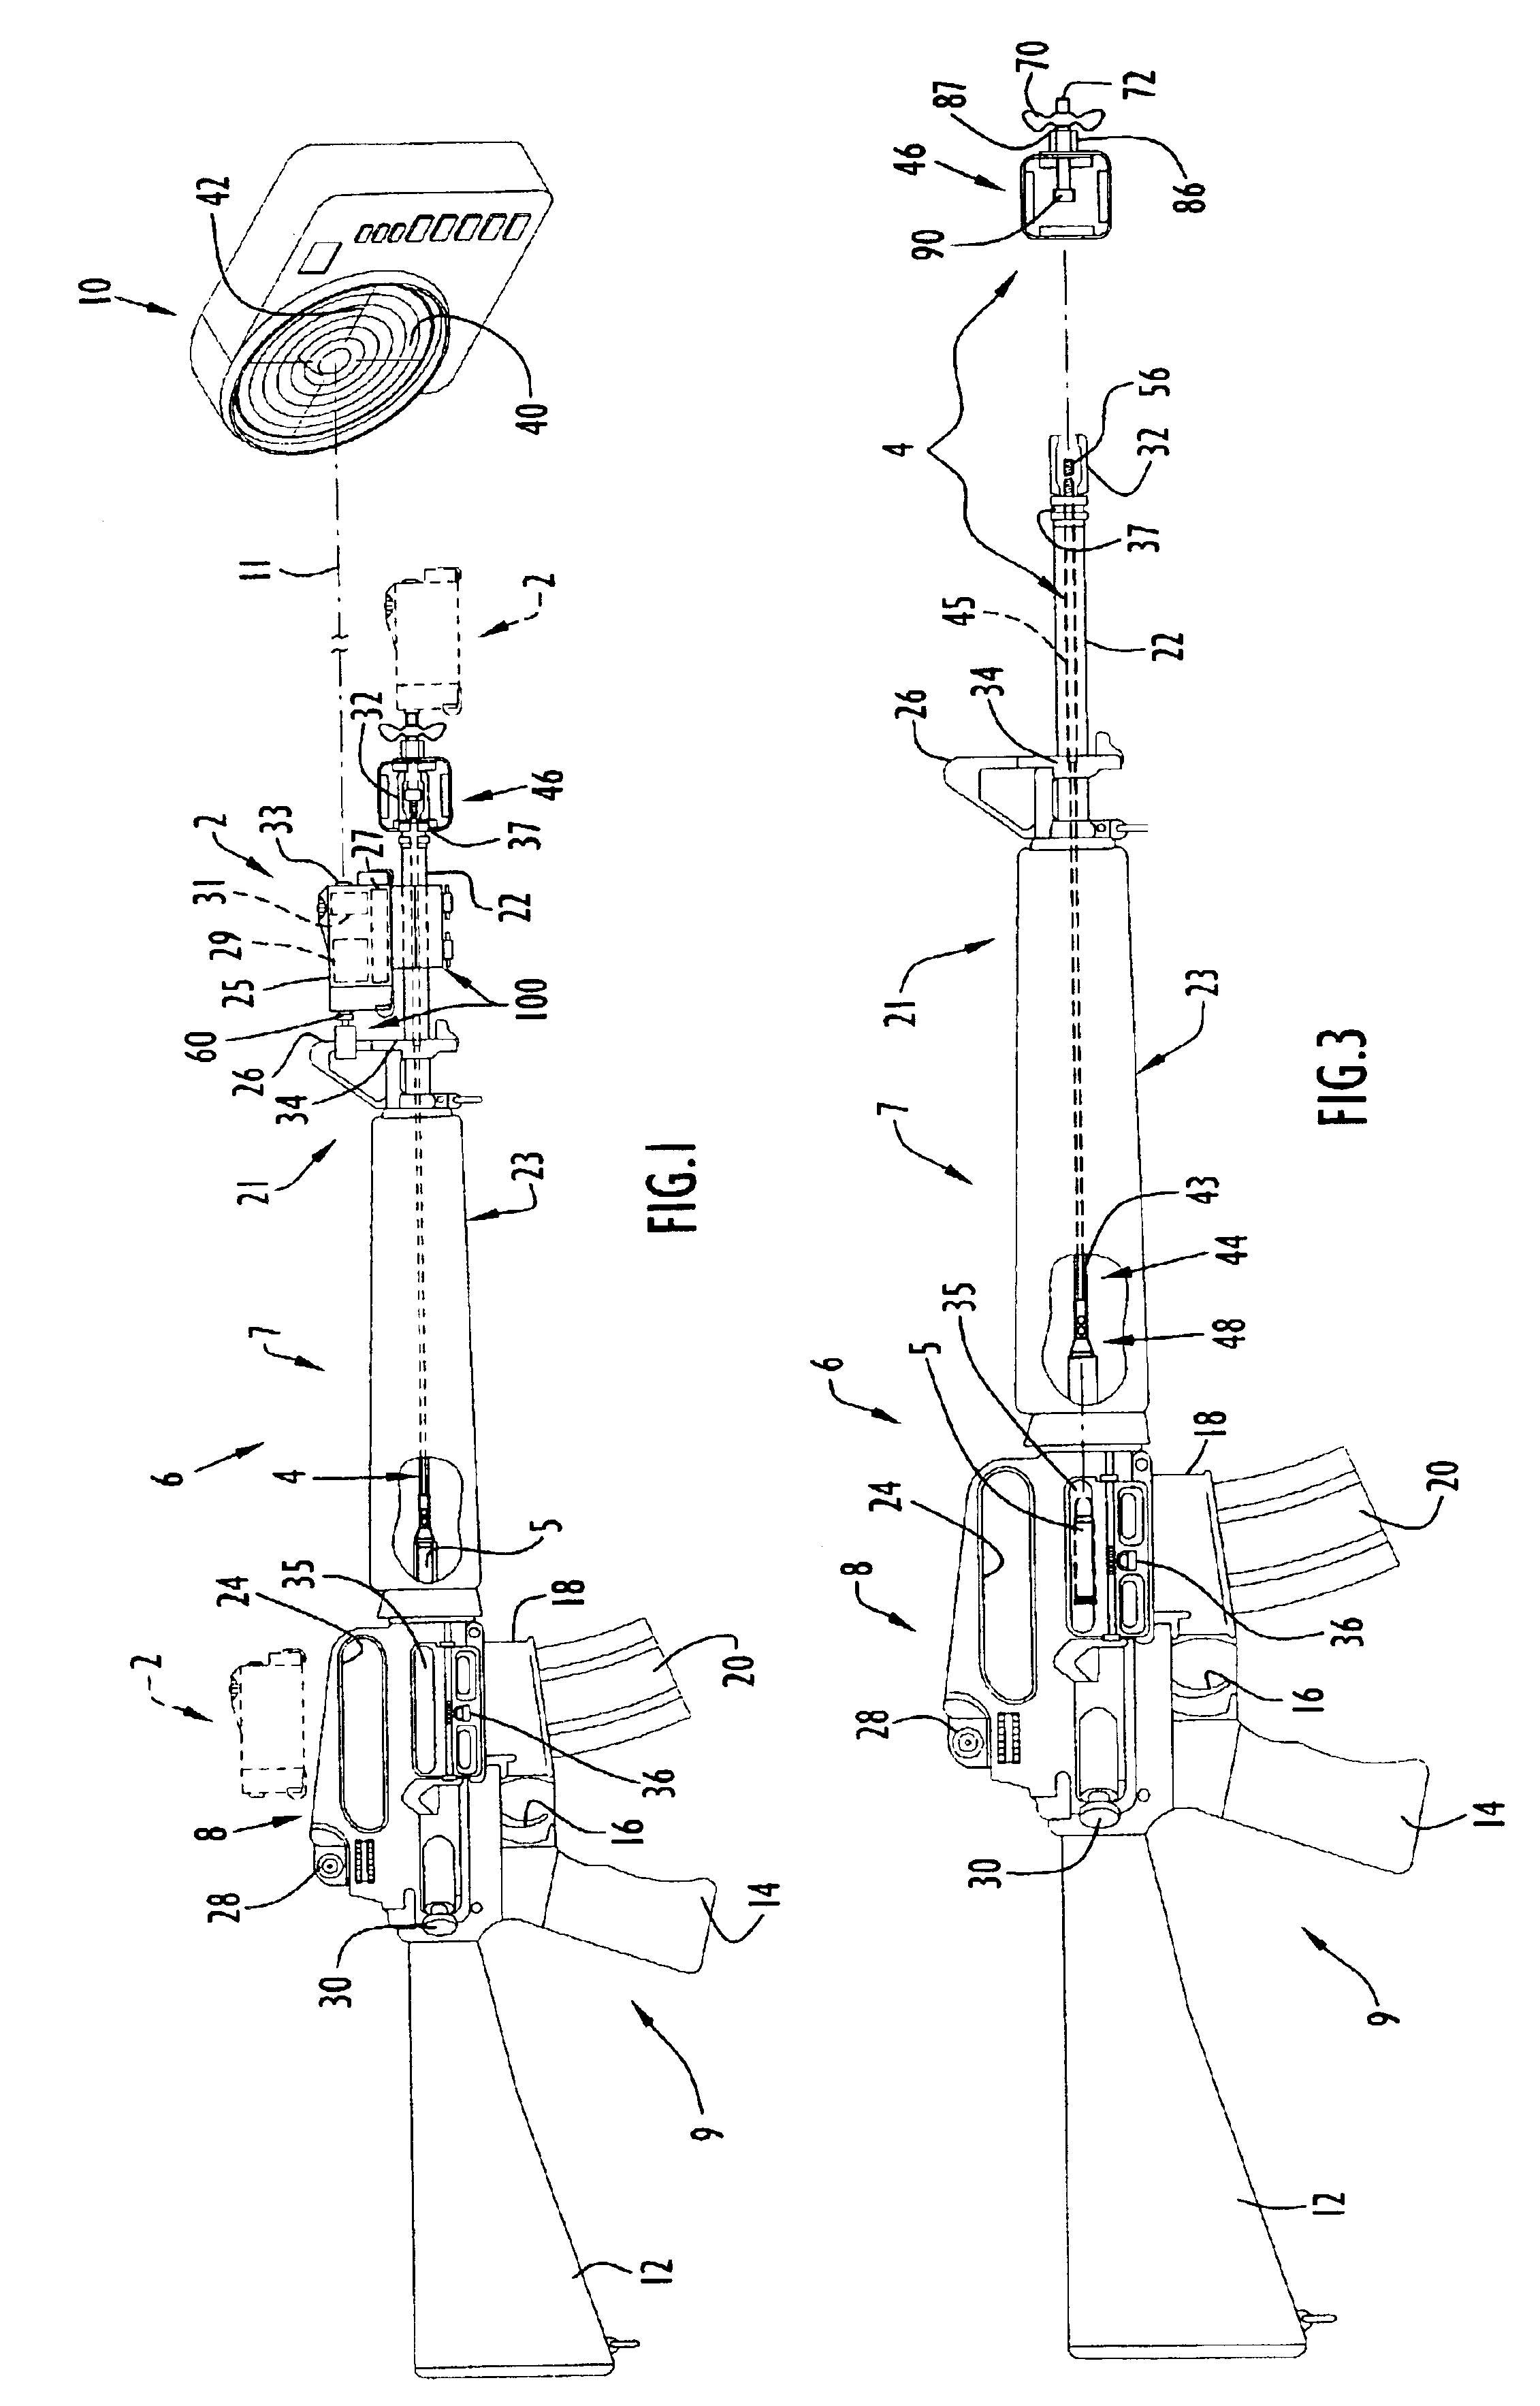 Firearm laser training system and method employing modified blank cartridges for simulating operation of a firearm